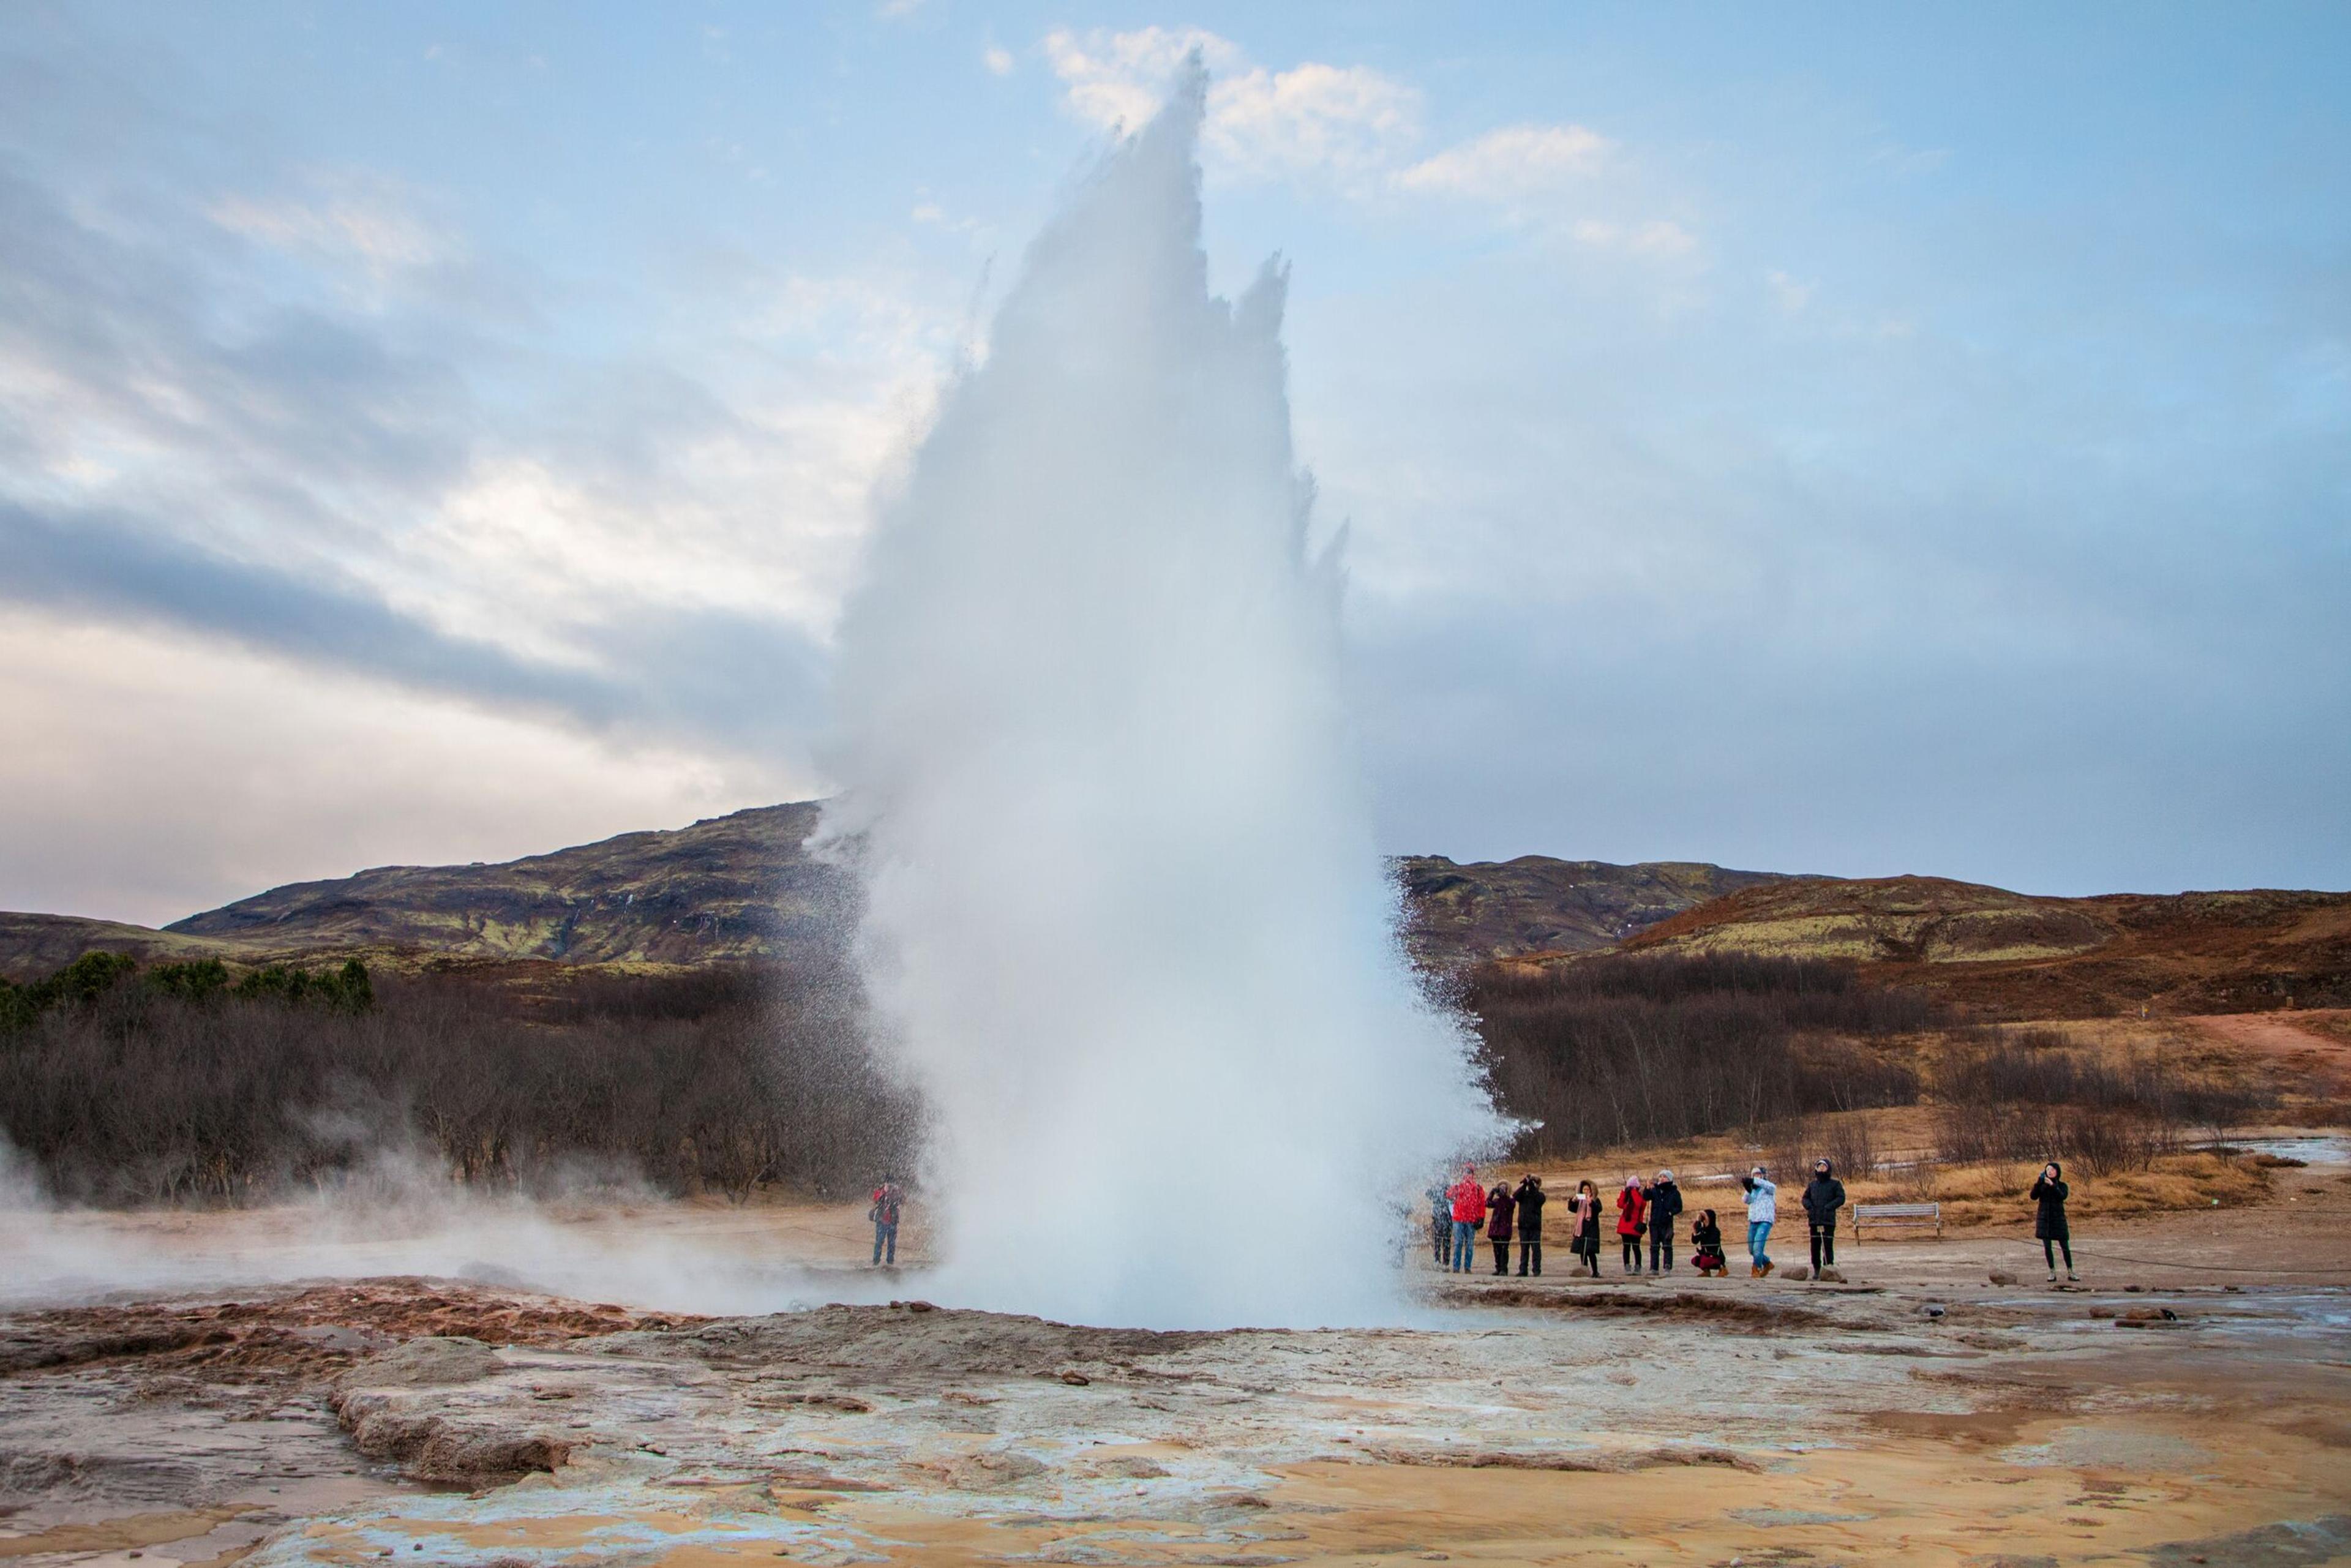 Geysir hotspring erupting in front of a group of tourists